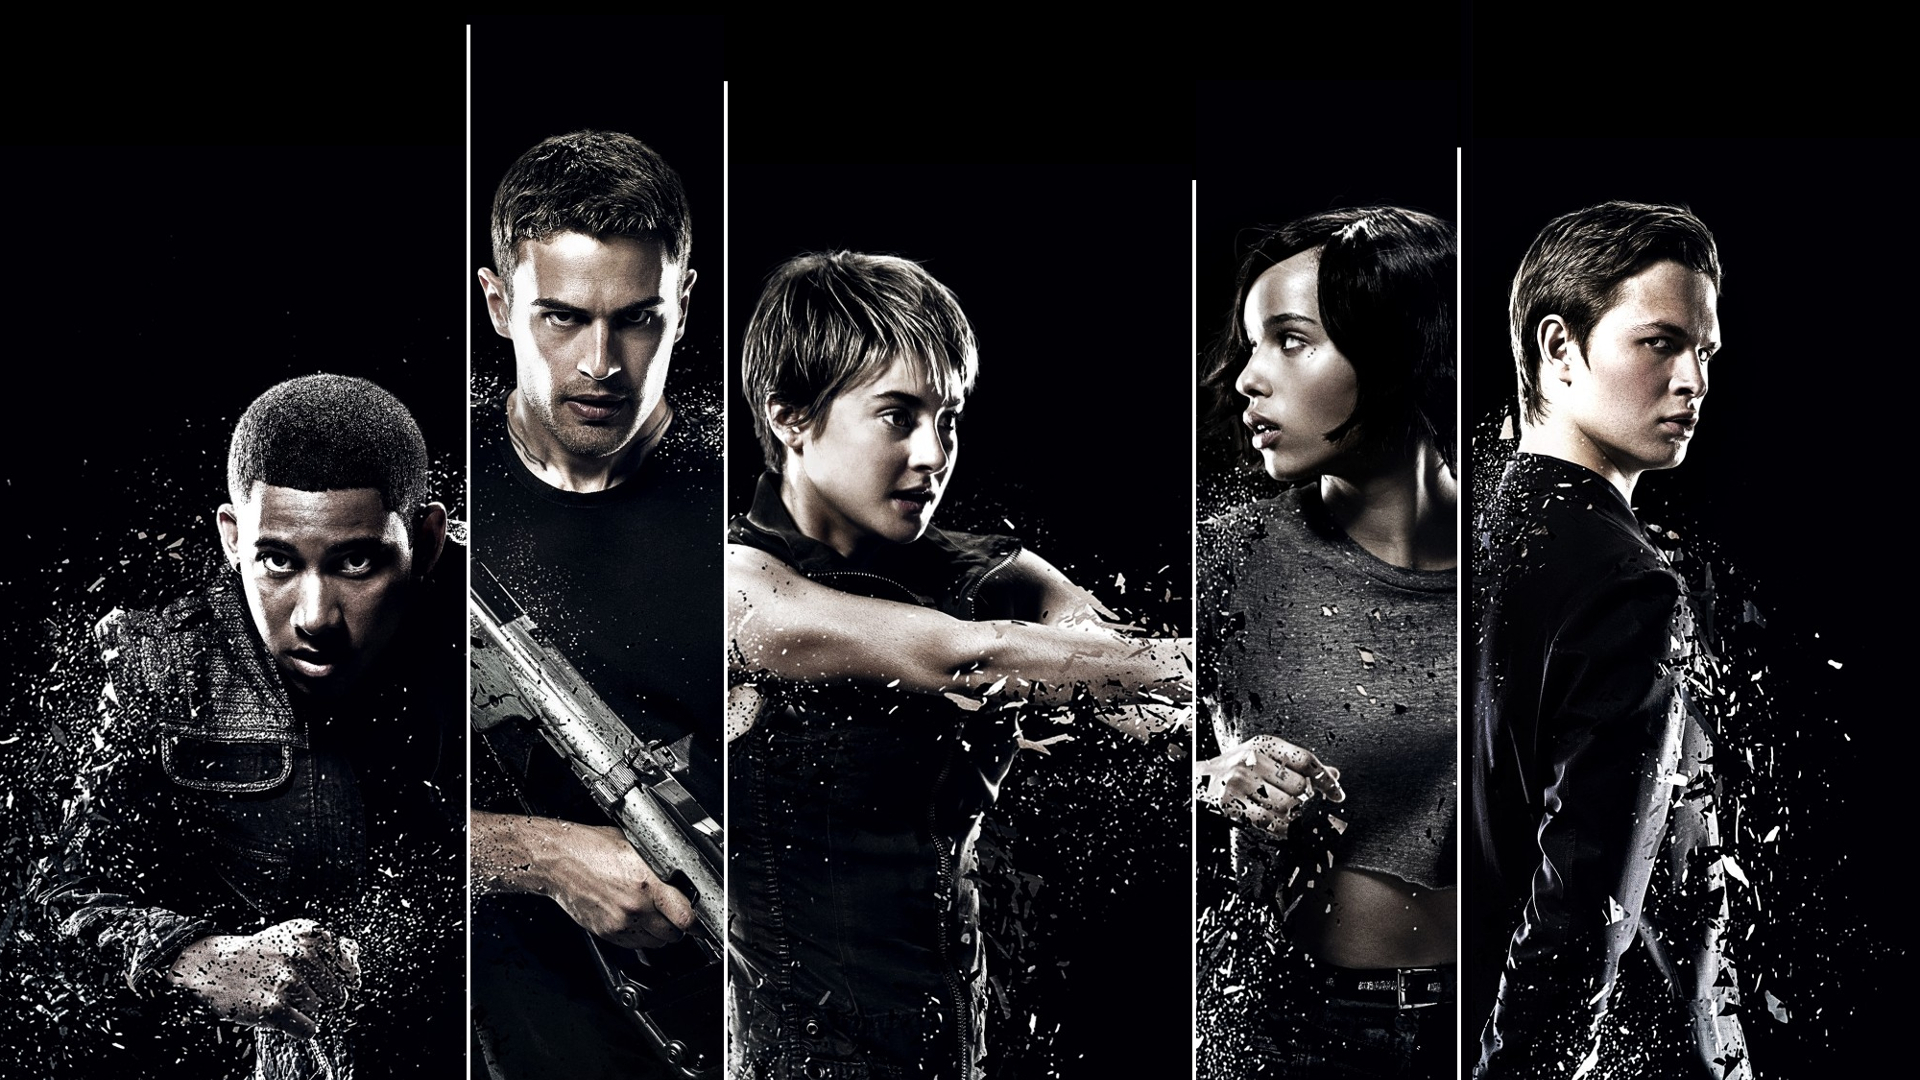 the divergent series insurgent full movie online for free